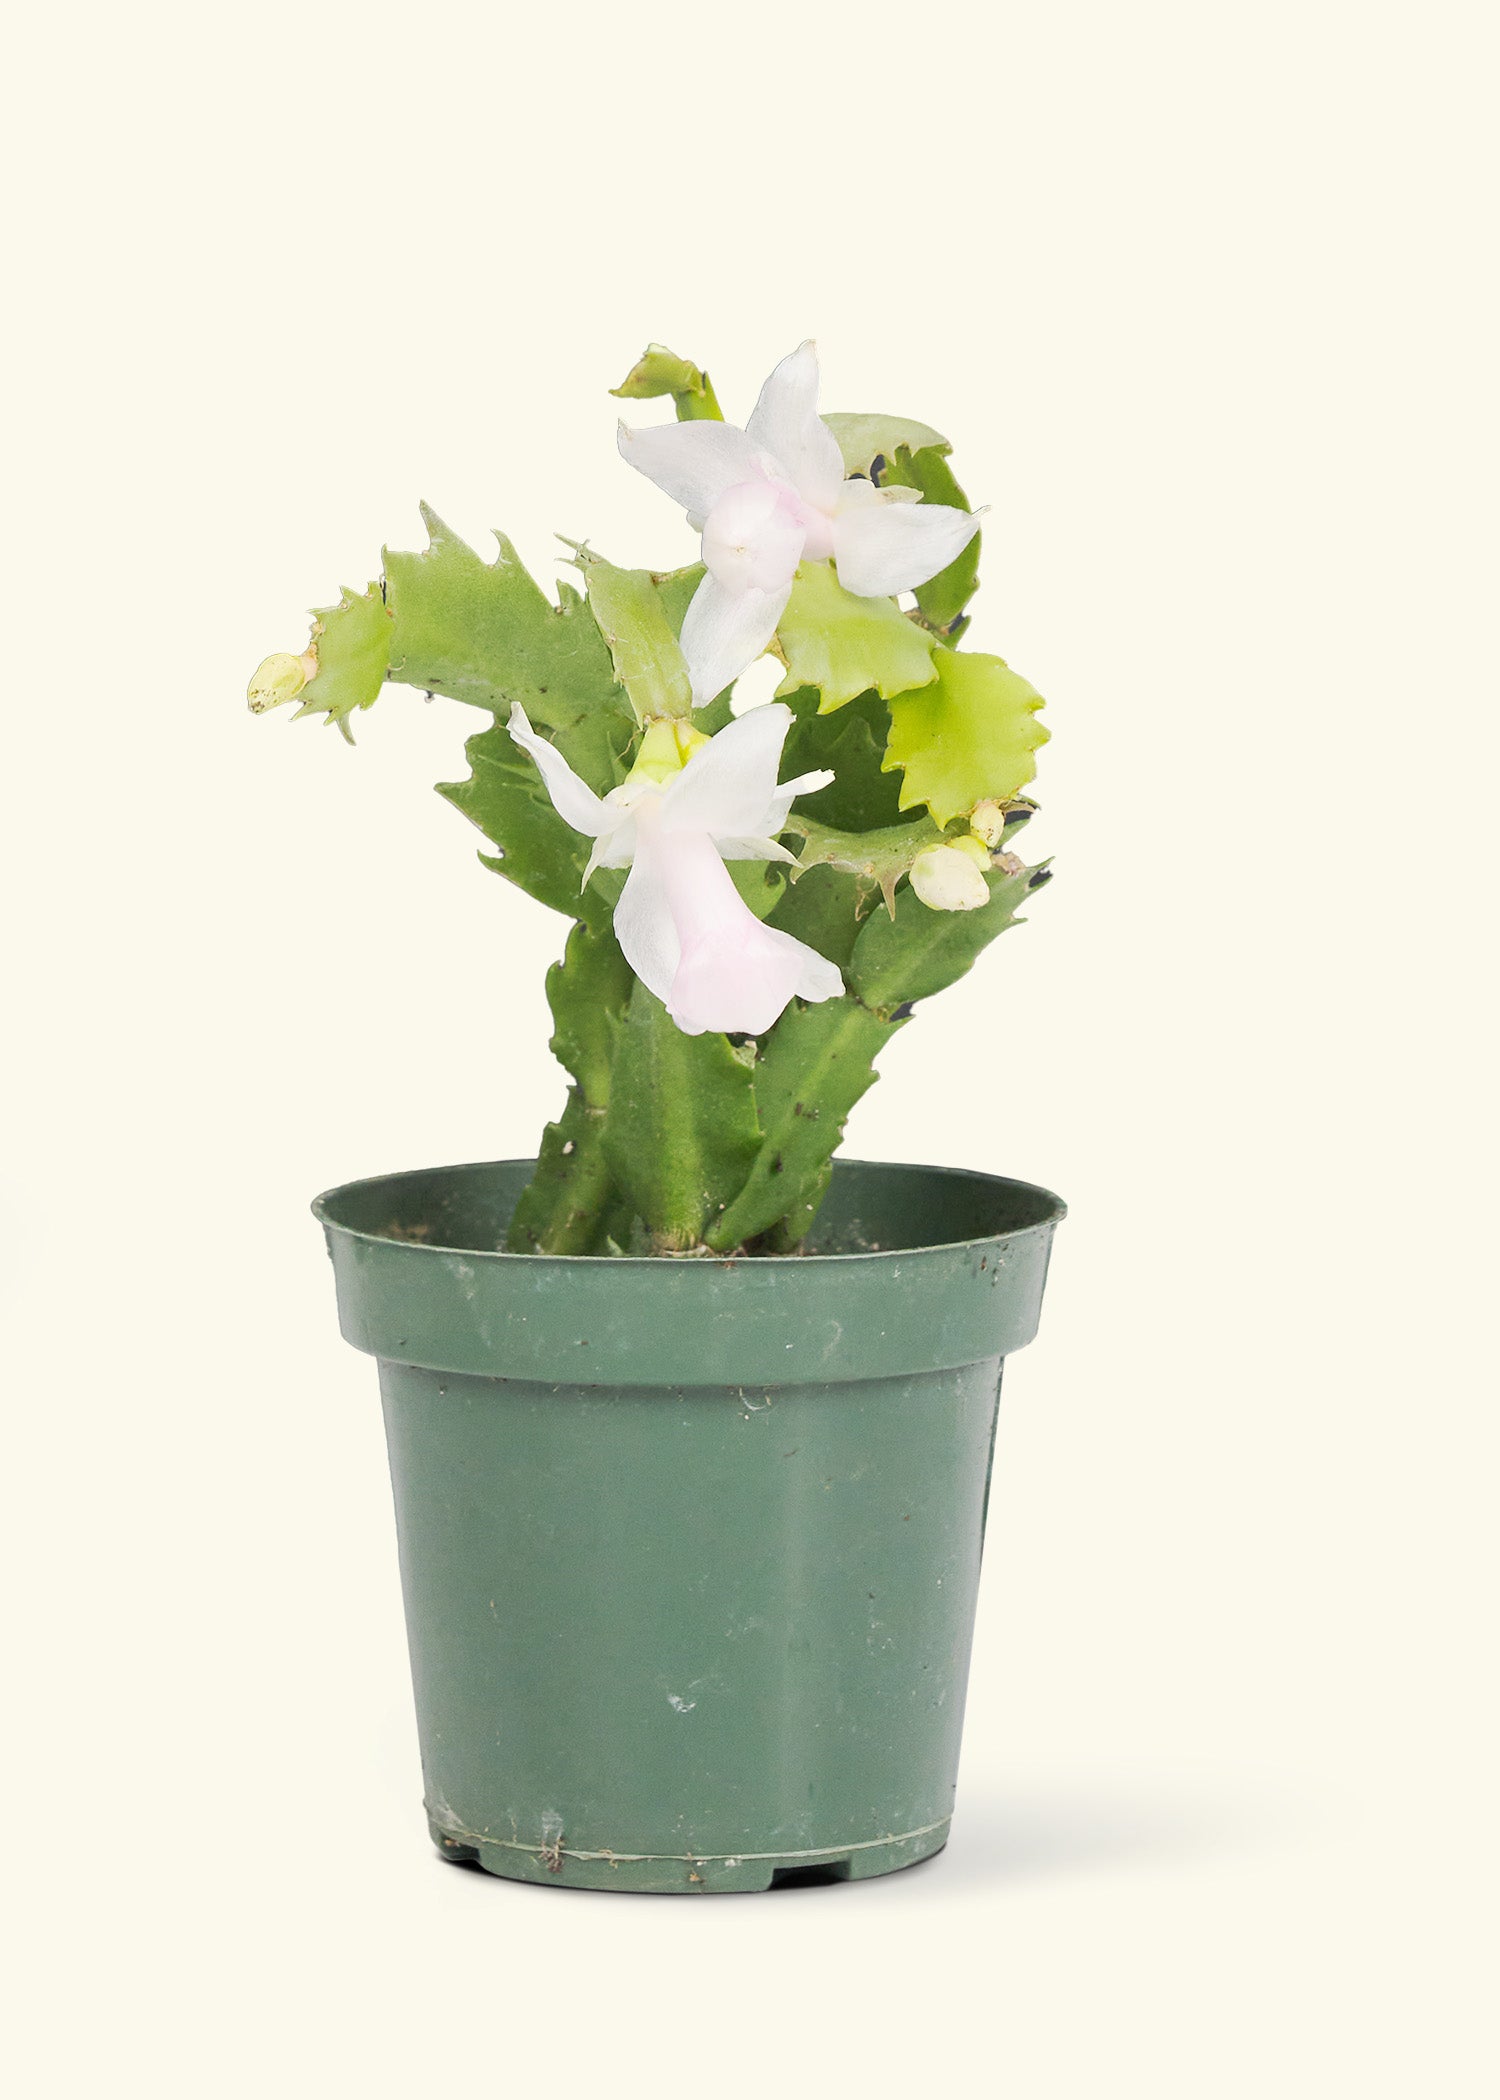 Small White Christmas Cactus in a grow pot.